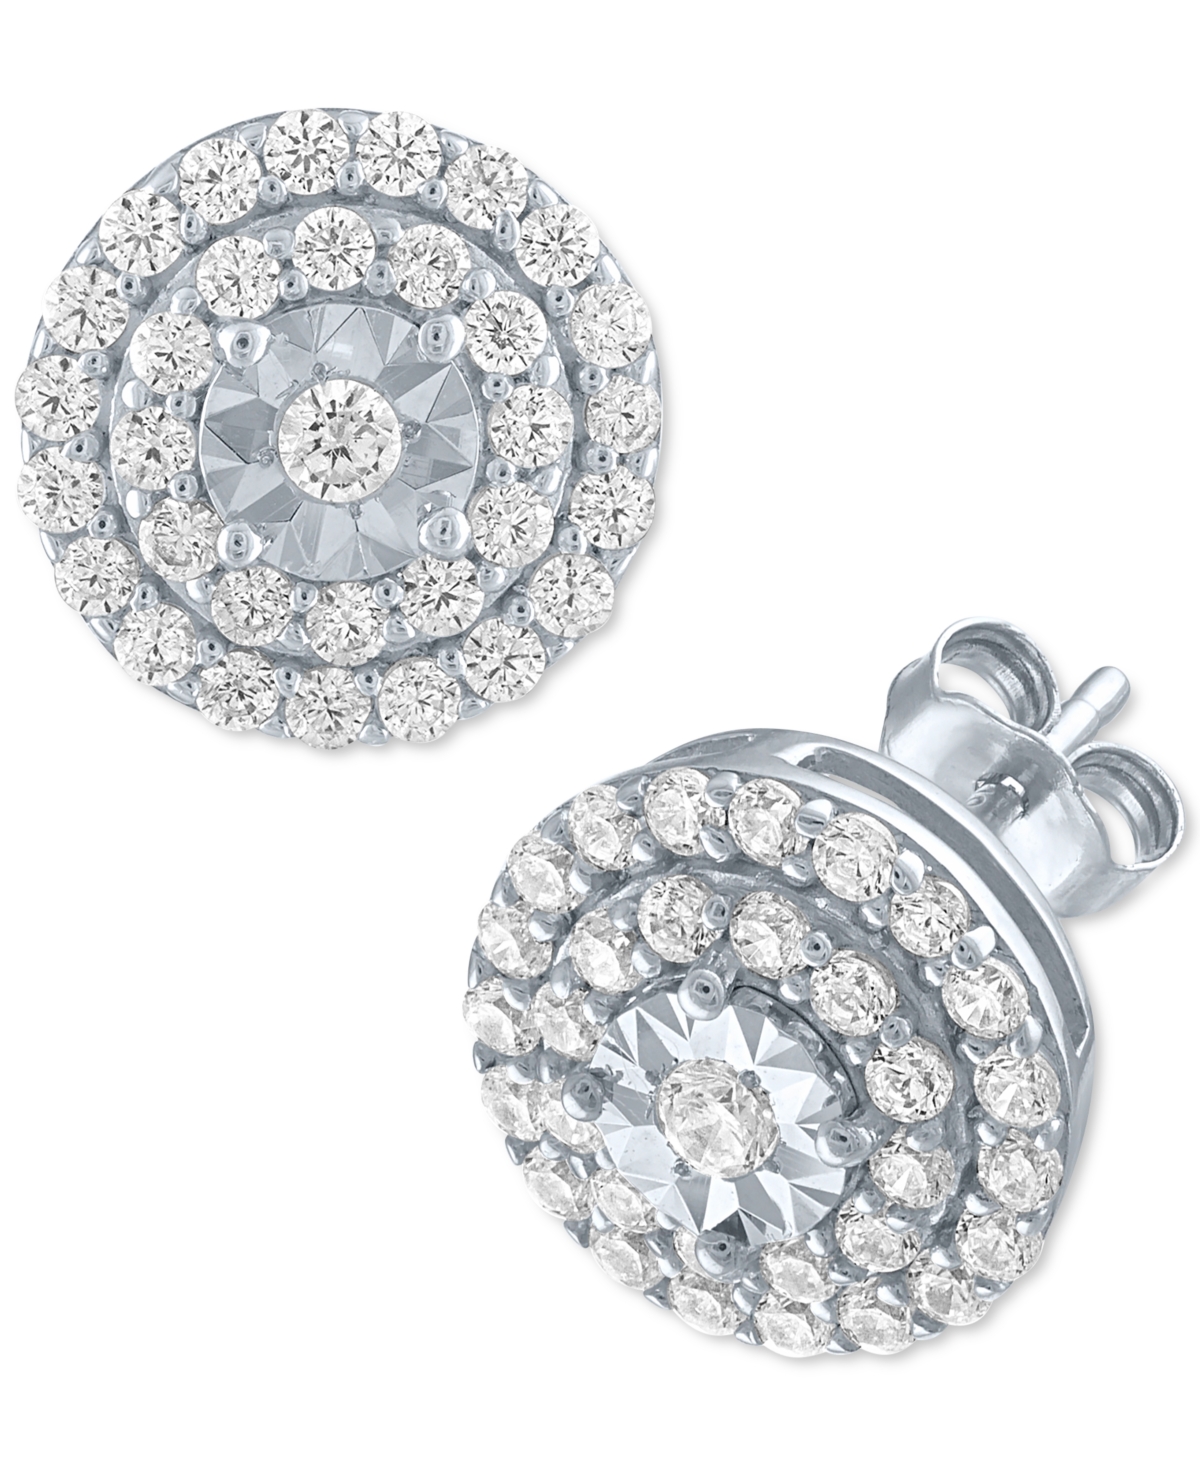 Lab-Created Diamond Cluster Stud Earrings (3/4 ct. t.w.) in Sterling Silver - Sterling Silver